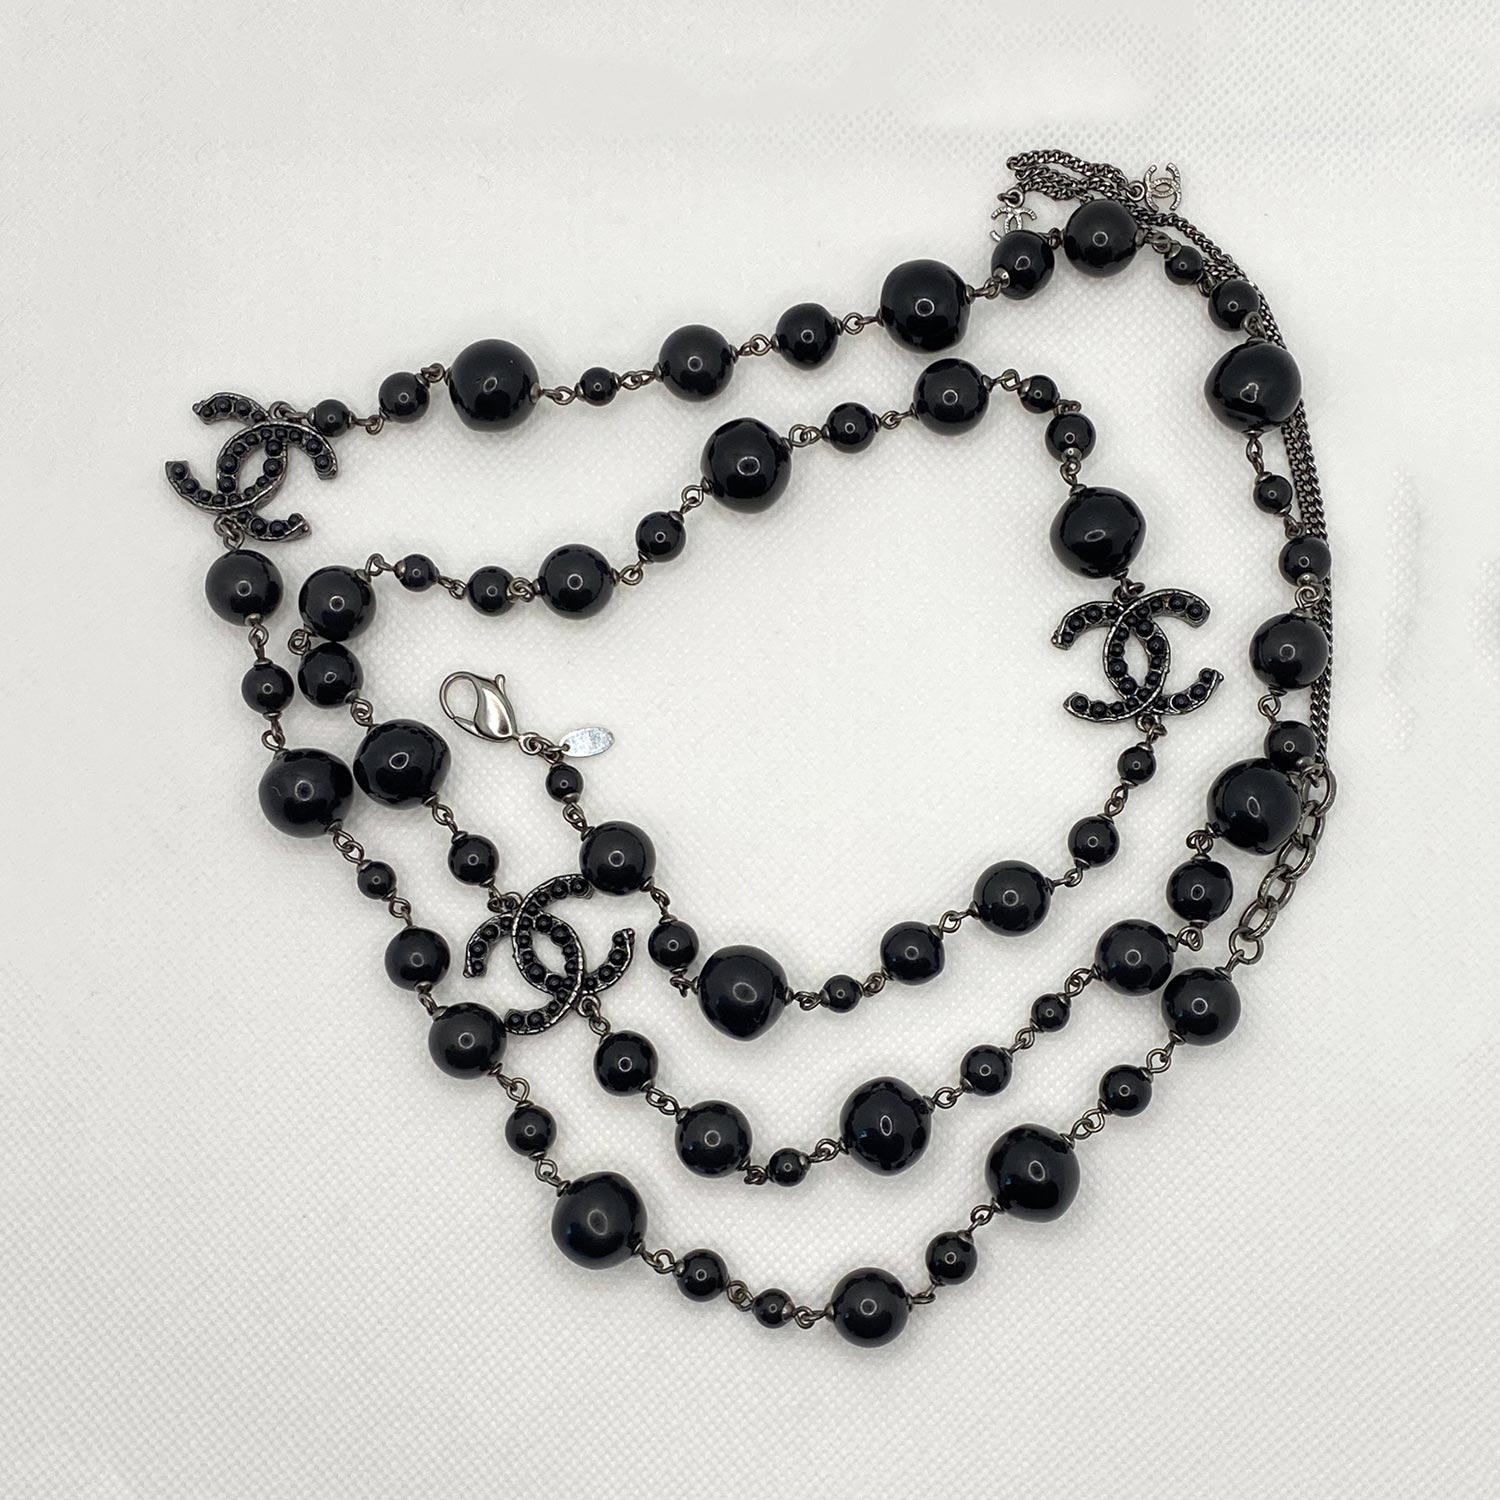 Shop authentic Chanel Black Bead Long Necklace at revogue for just USD ...